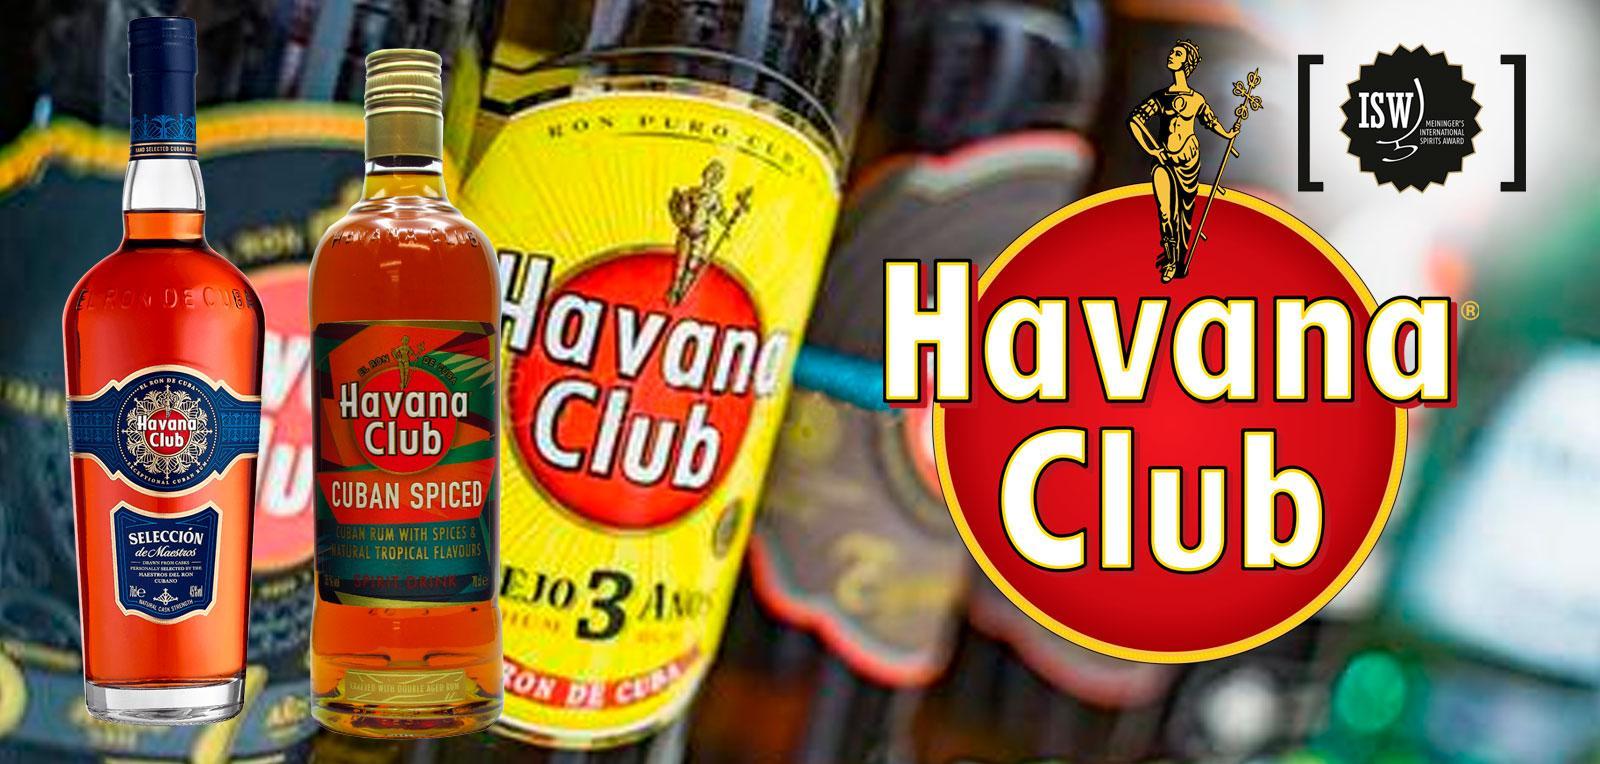 Havana Club consolidated among the best rums in the world with new medals